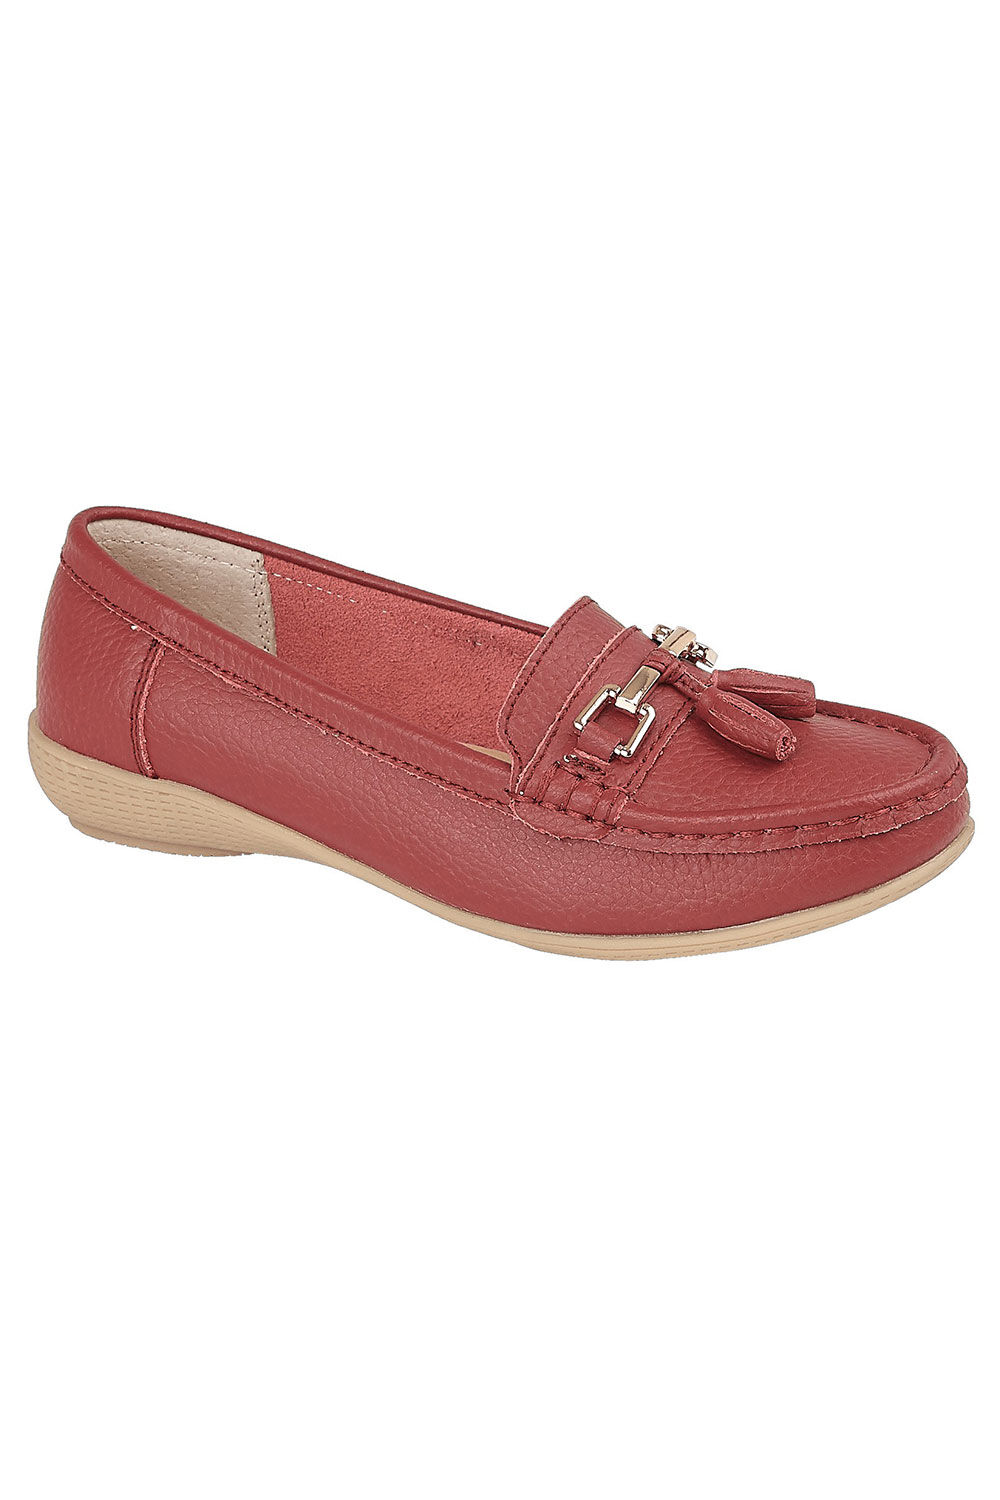 Jo & Joe Red - Moccasin Shoes With Tassel Detail, Size: 6